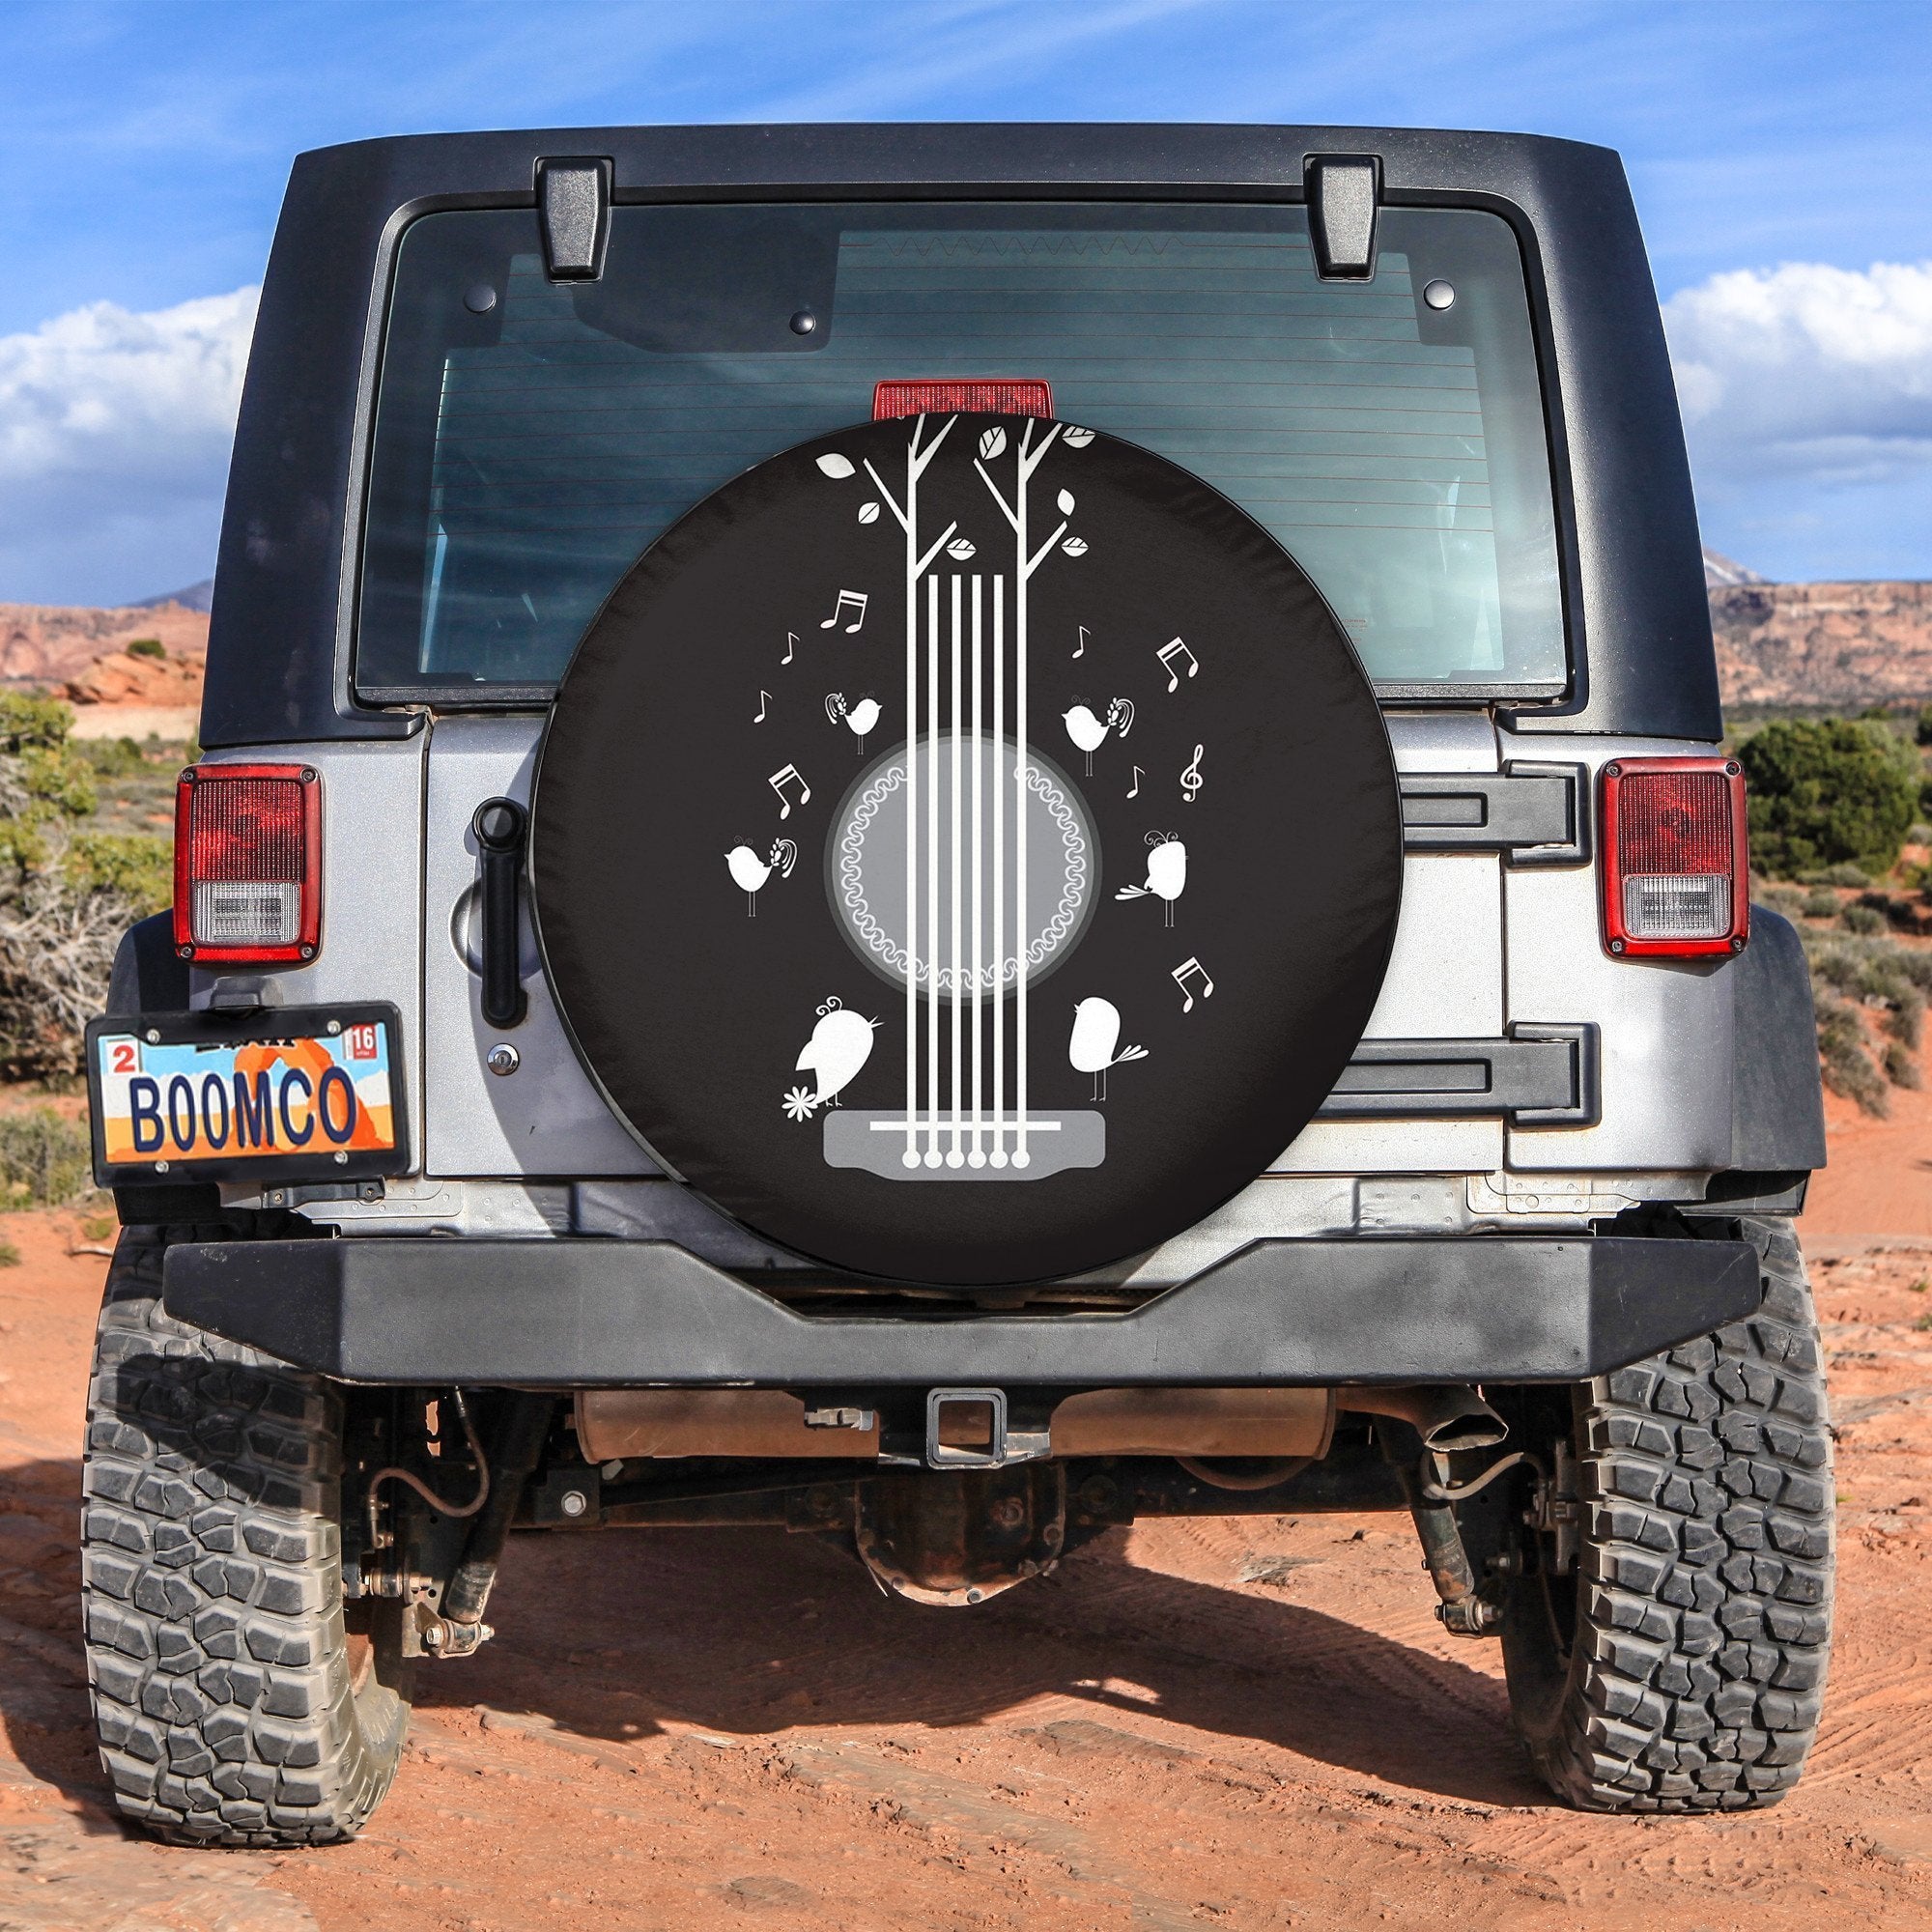 Guitar Strings And Singing Birds Spare Tire Cover Gift For Campers